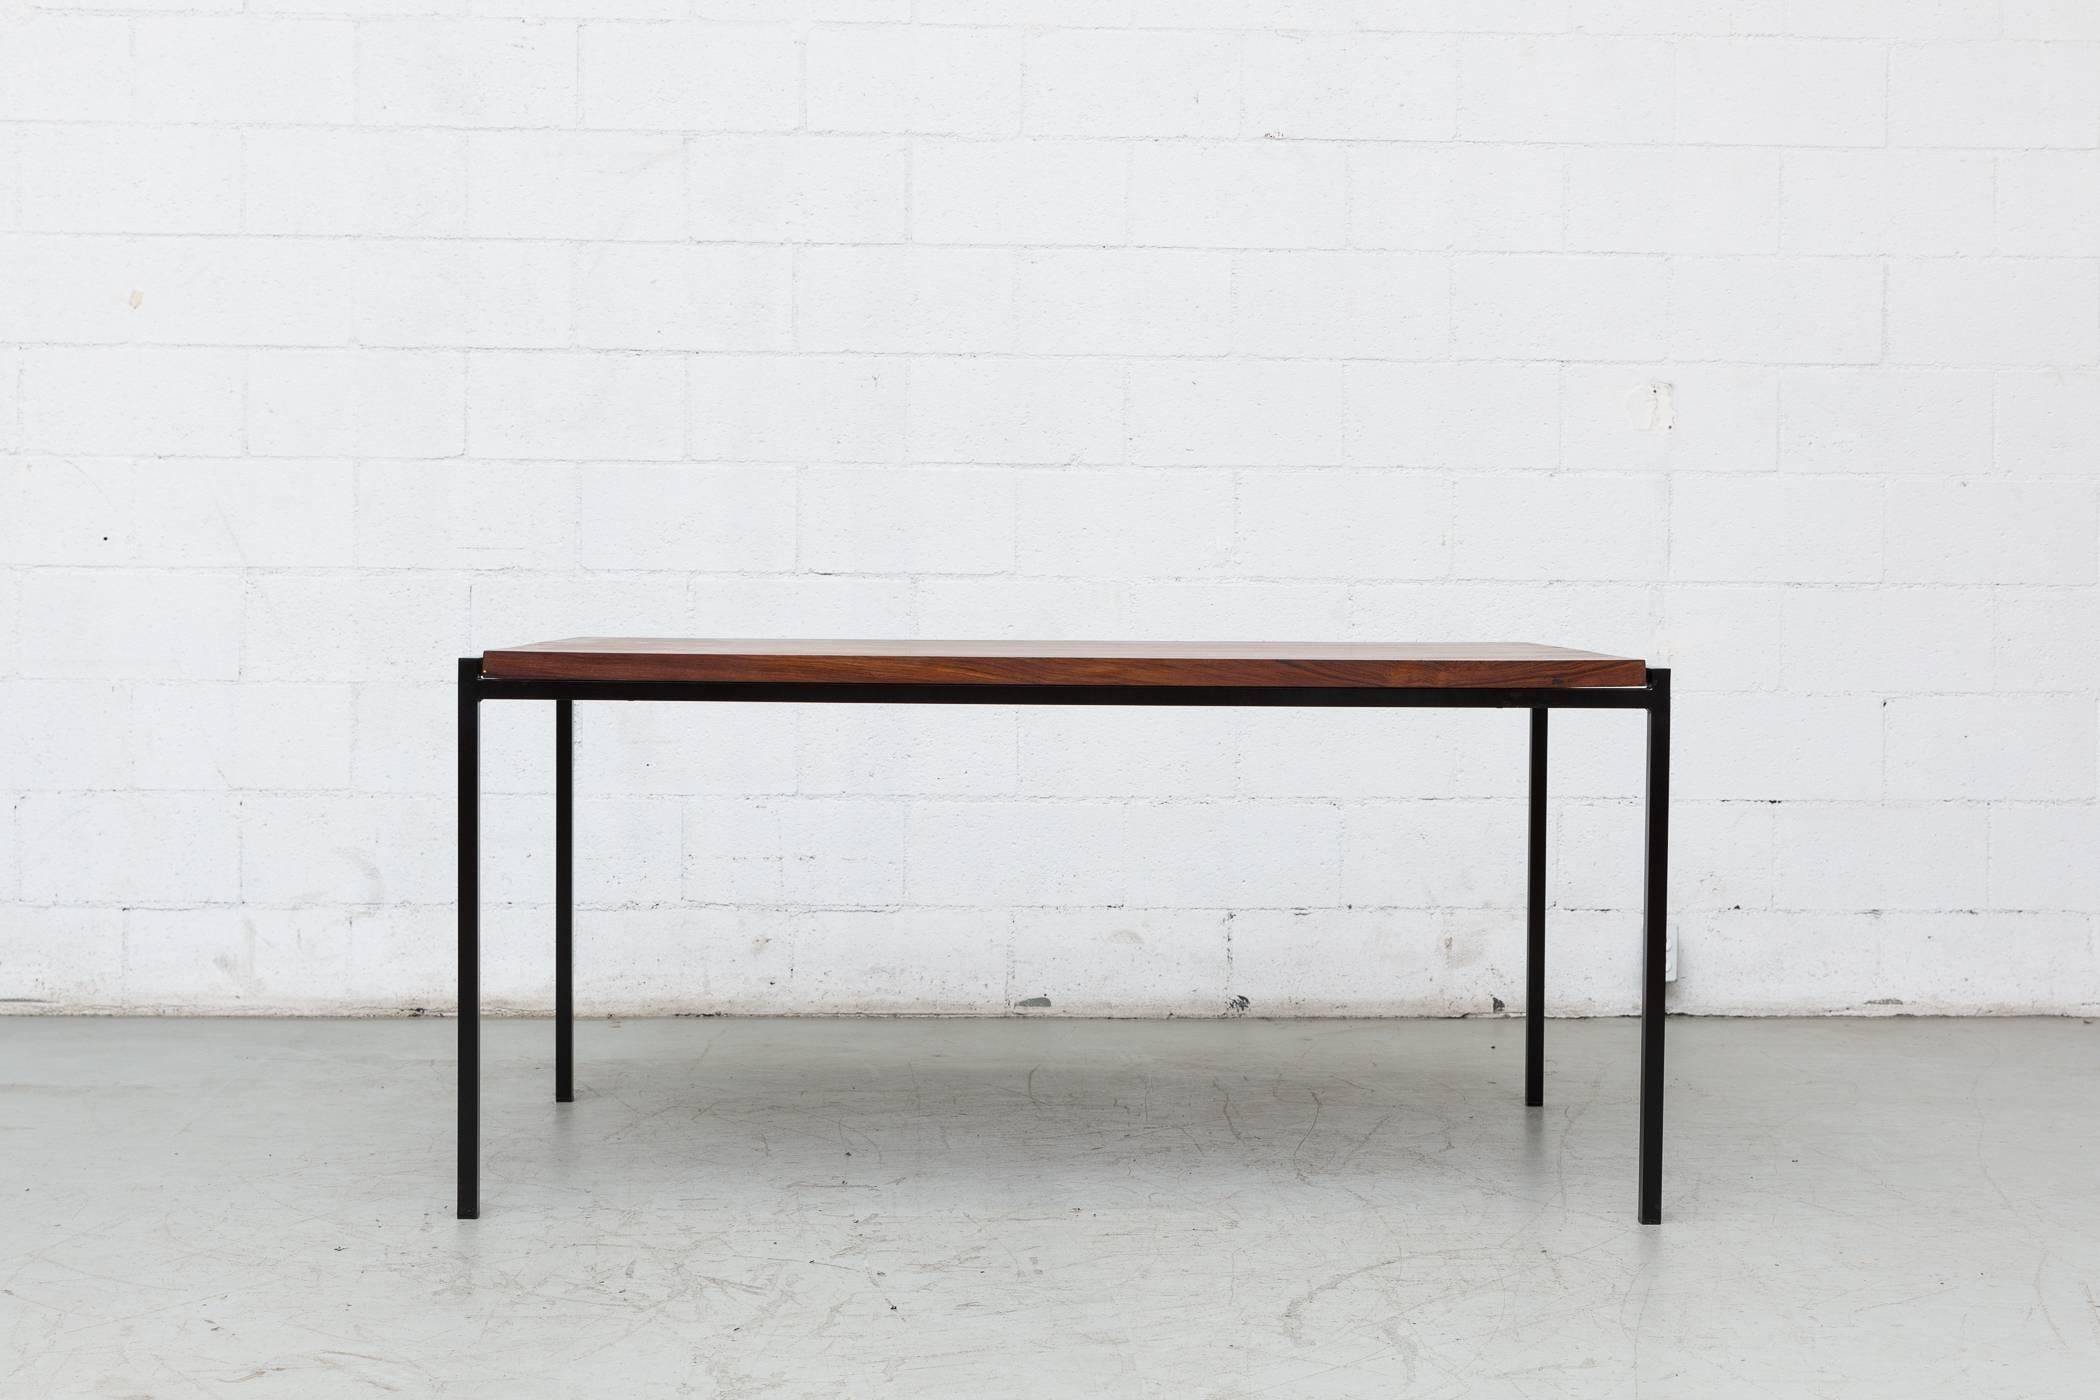 Rosewood topped black enameled metal table in good original condition in the style of Cees Braakman's Japanese Series dining table. Some wear to the frame consistent with its age and usage. Other similar tables available and listed separately.